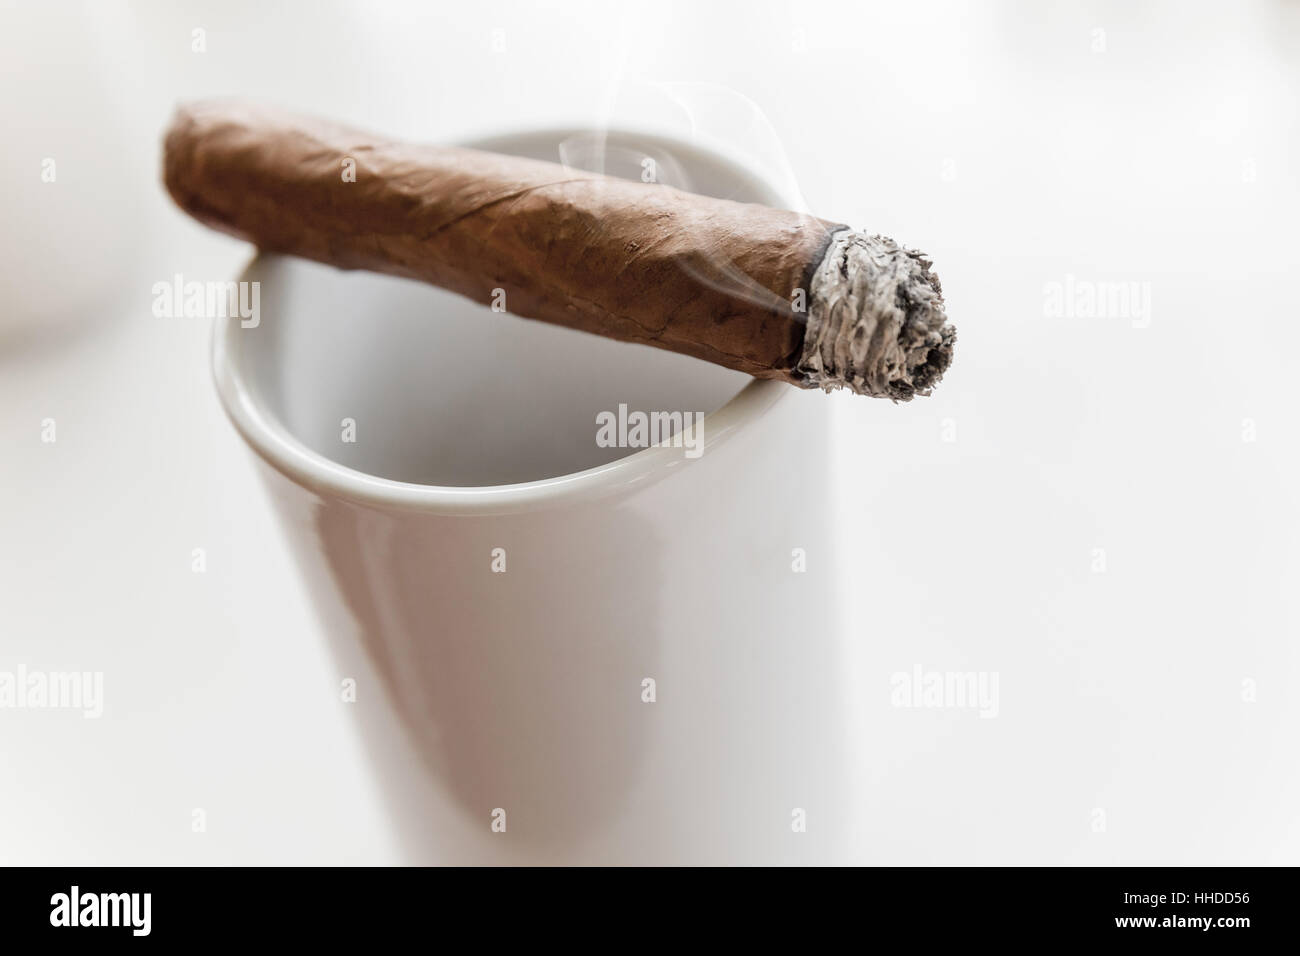 Handmade cigar lays on white coffee cup, close-up photo with selective focus over white background Stock Photo